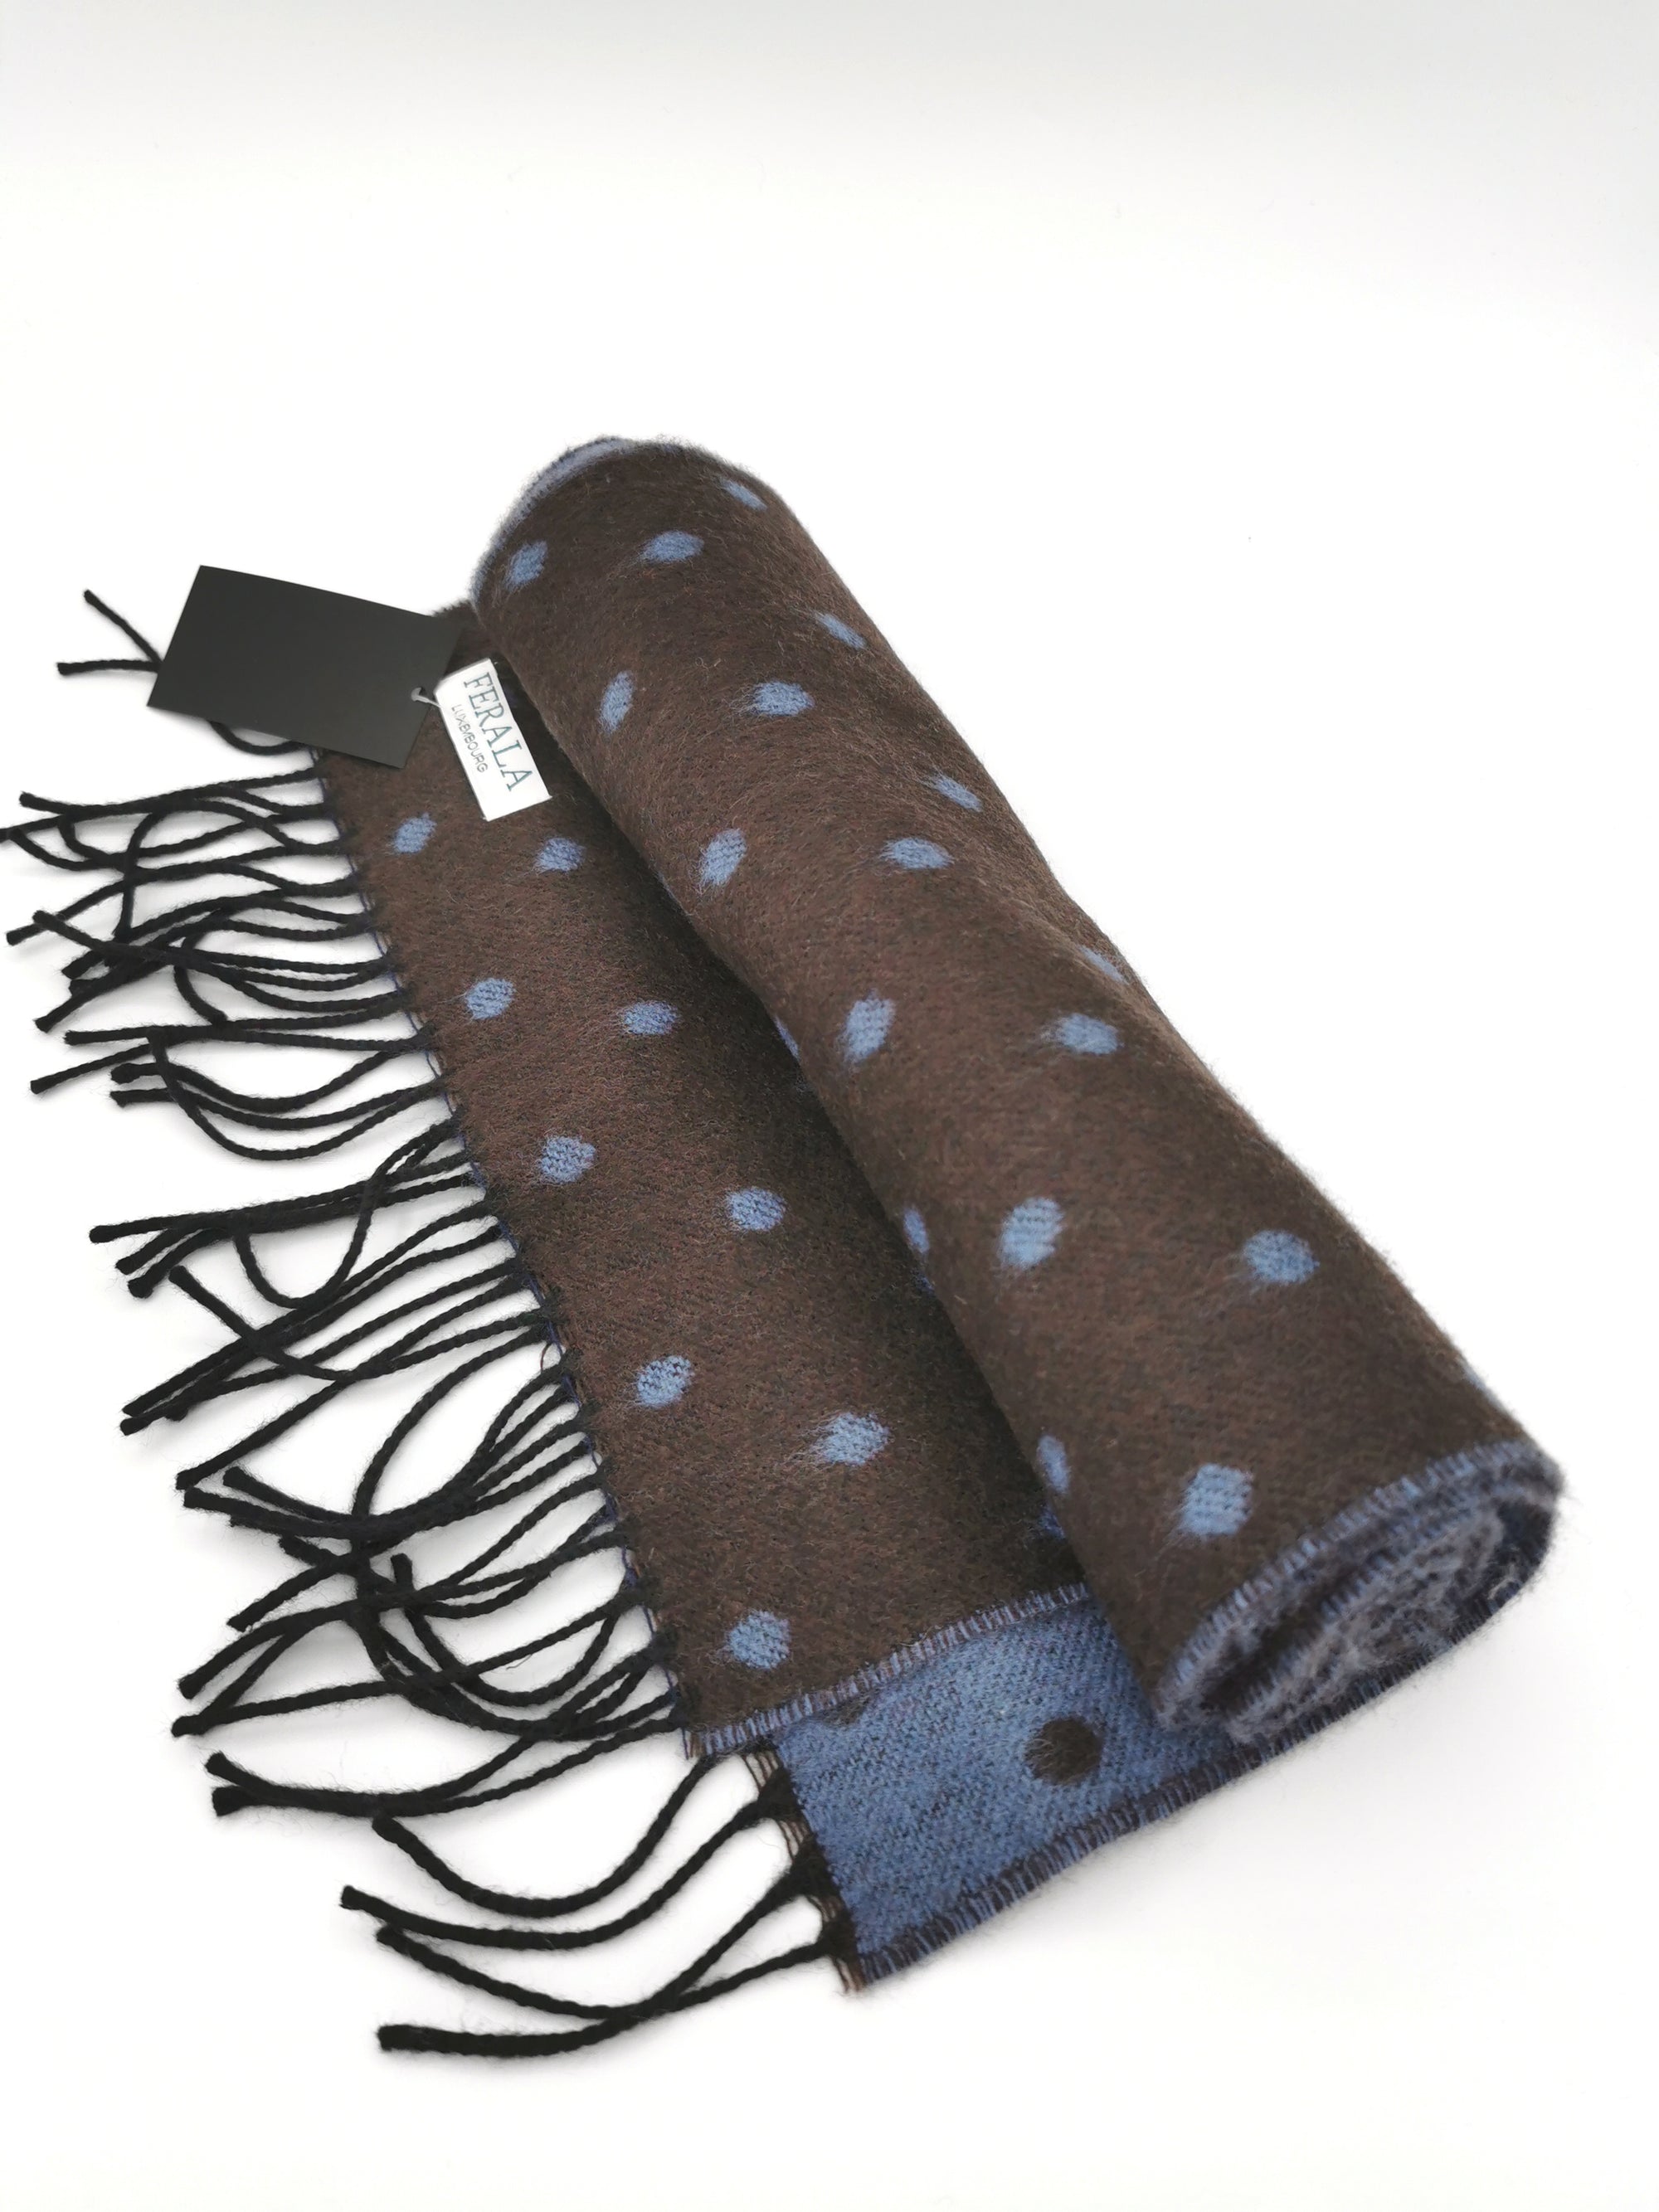 Wool/cashmere scarf with polka dots